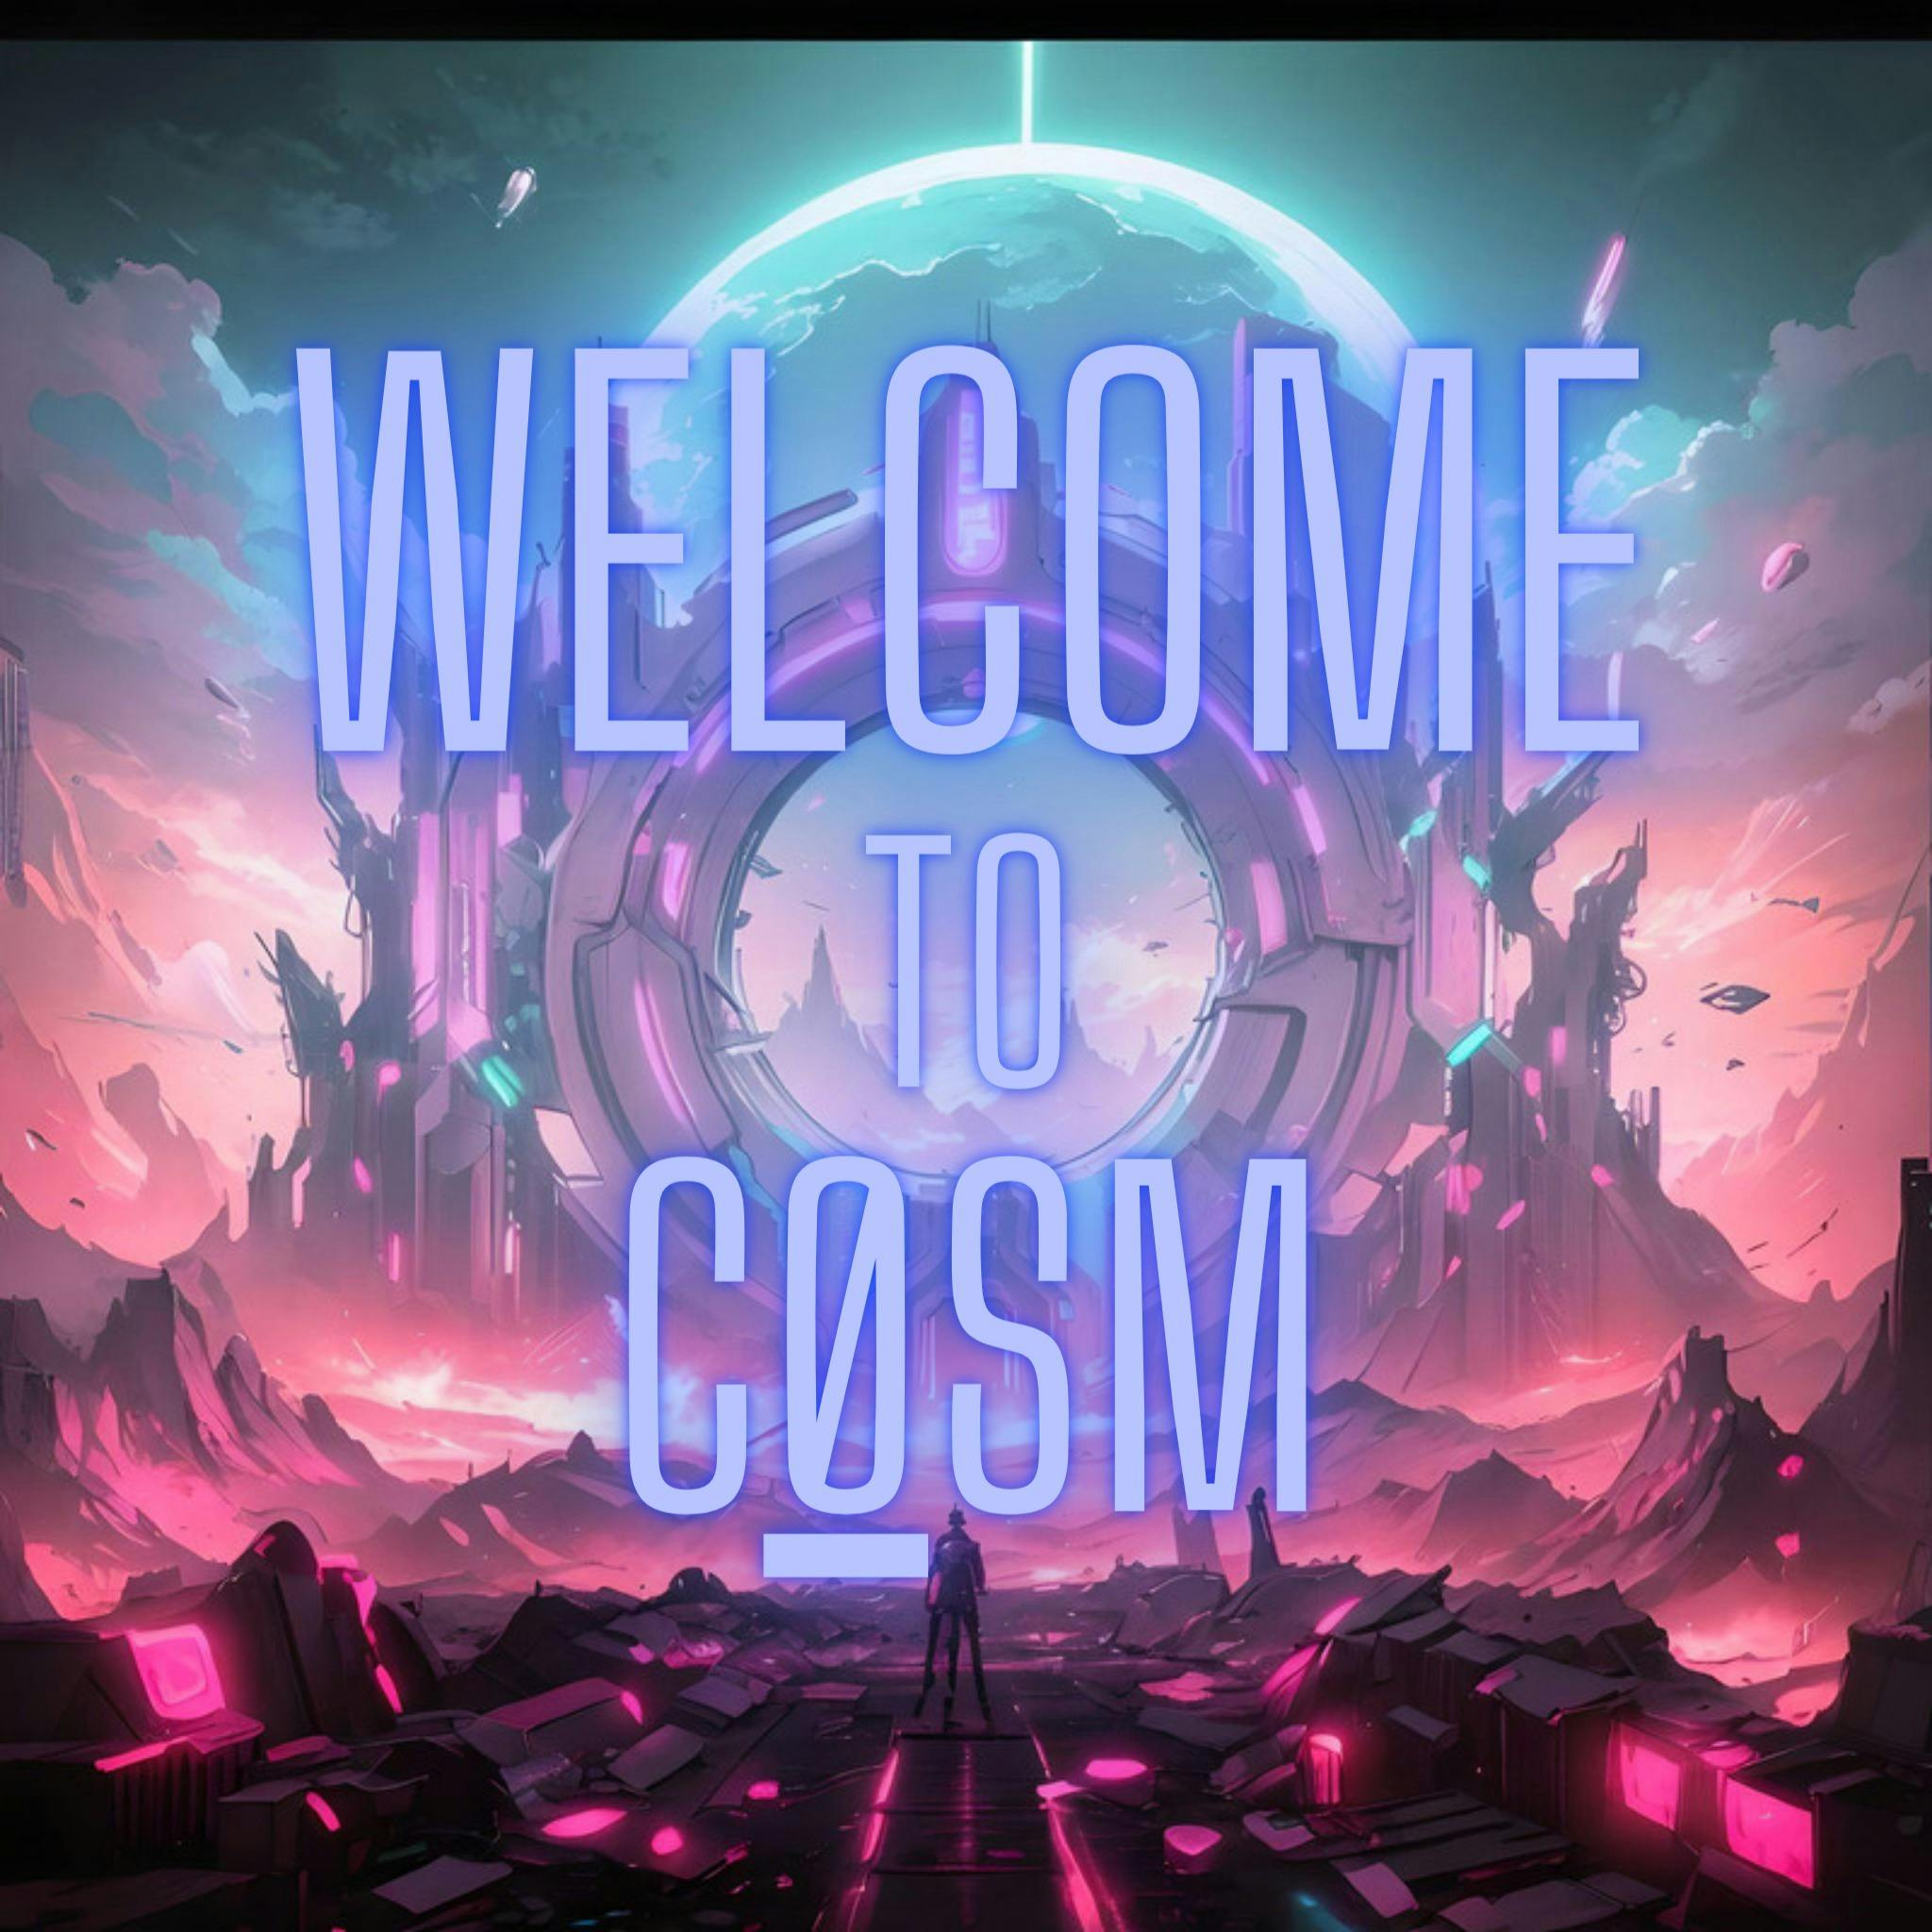 Welcome To CØSM